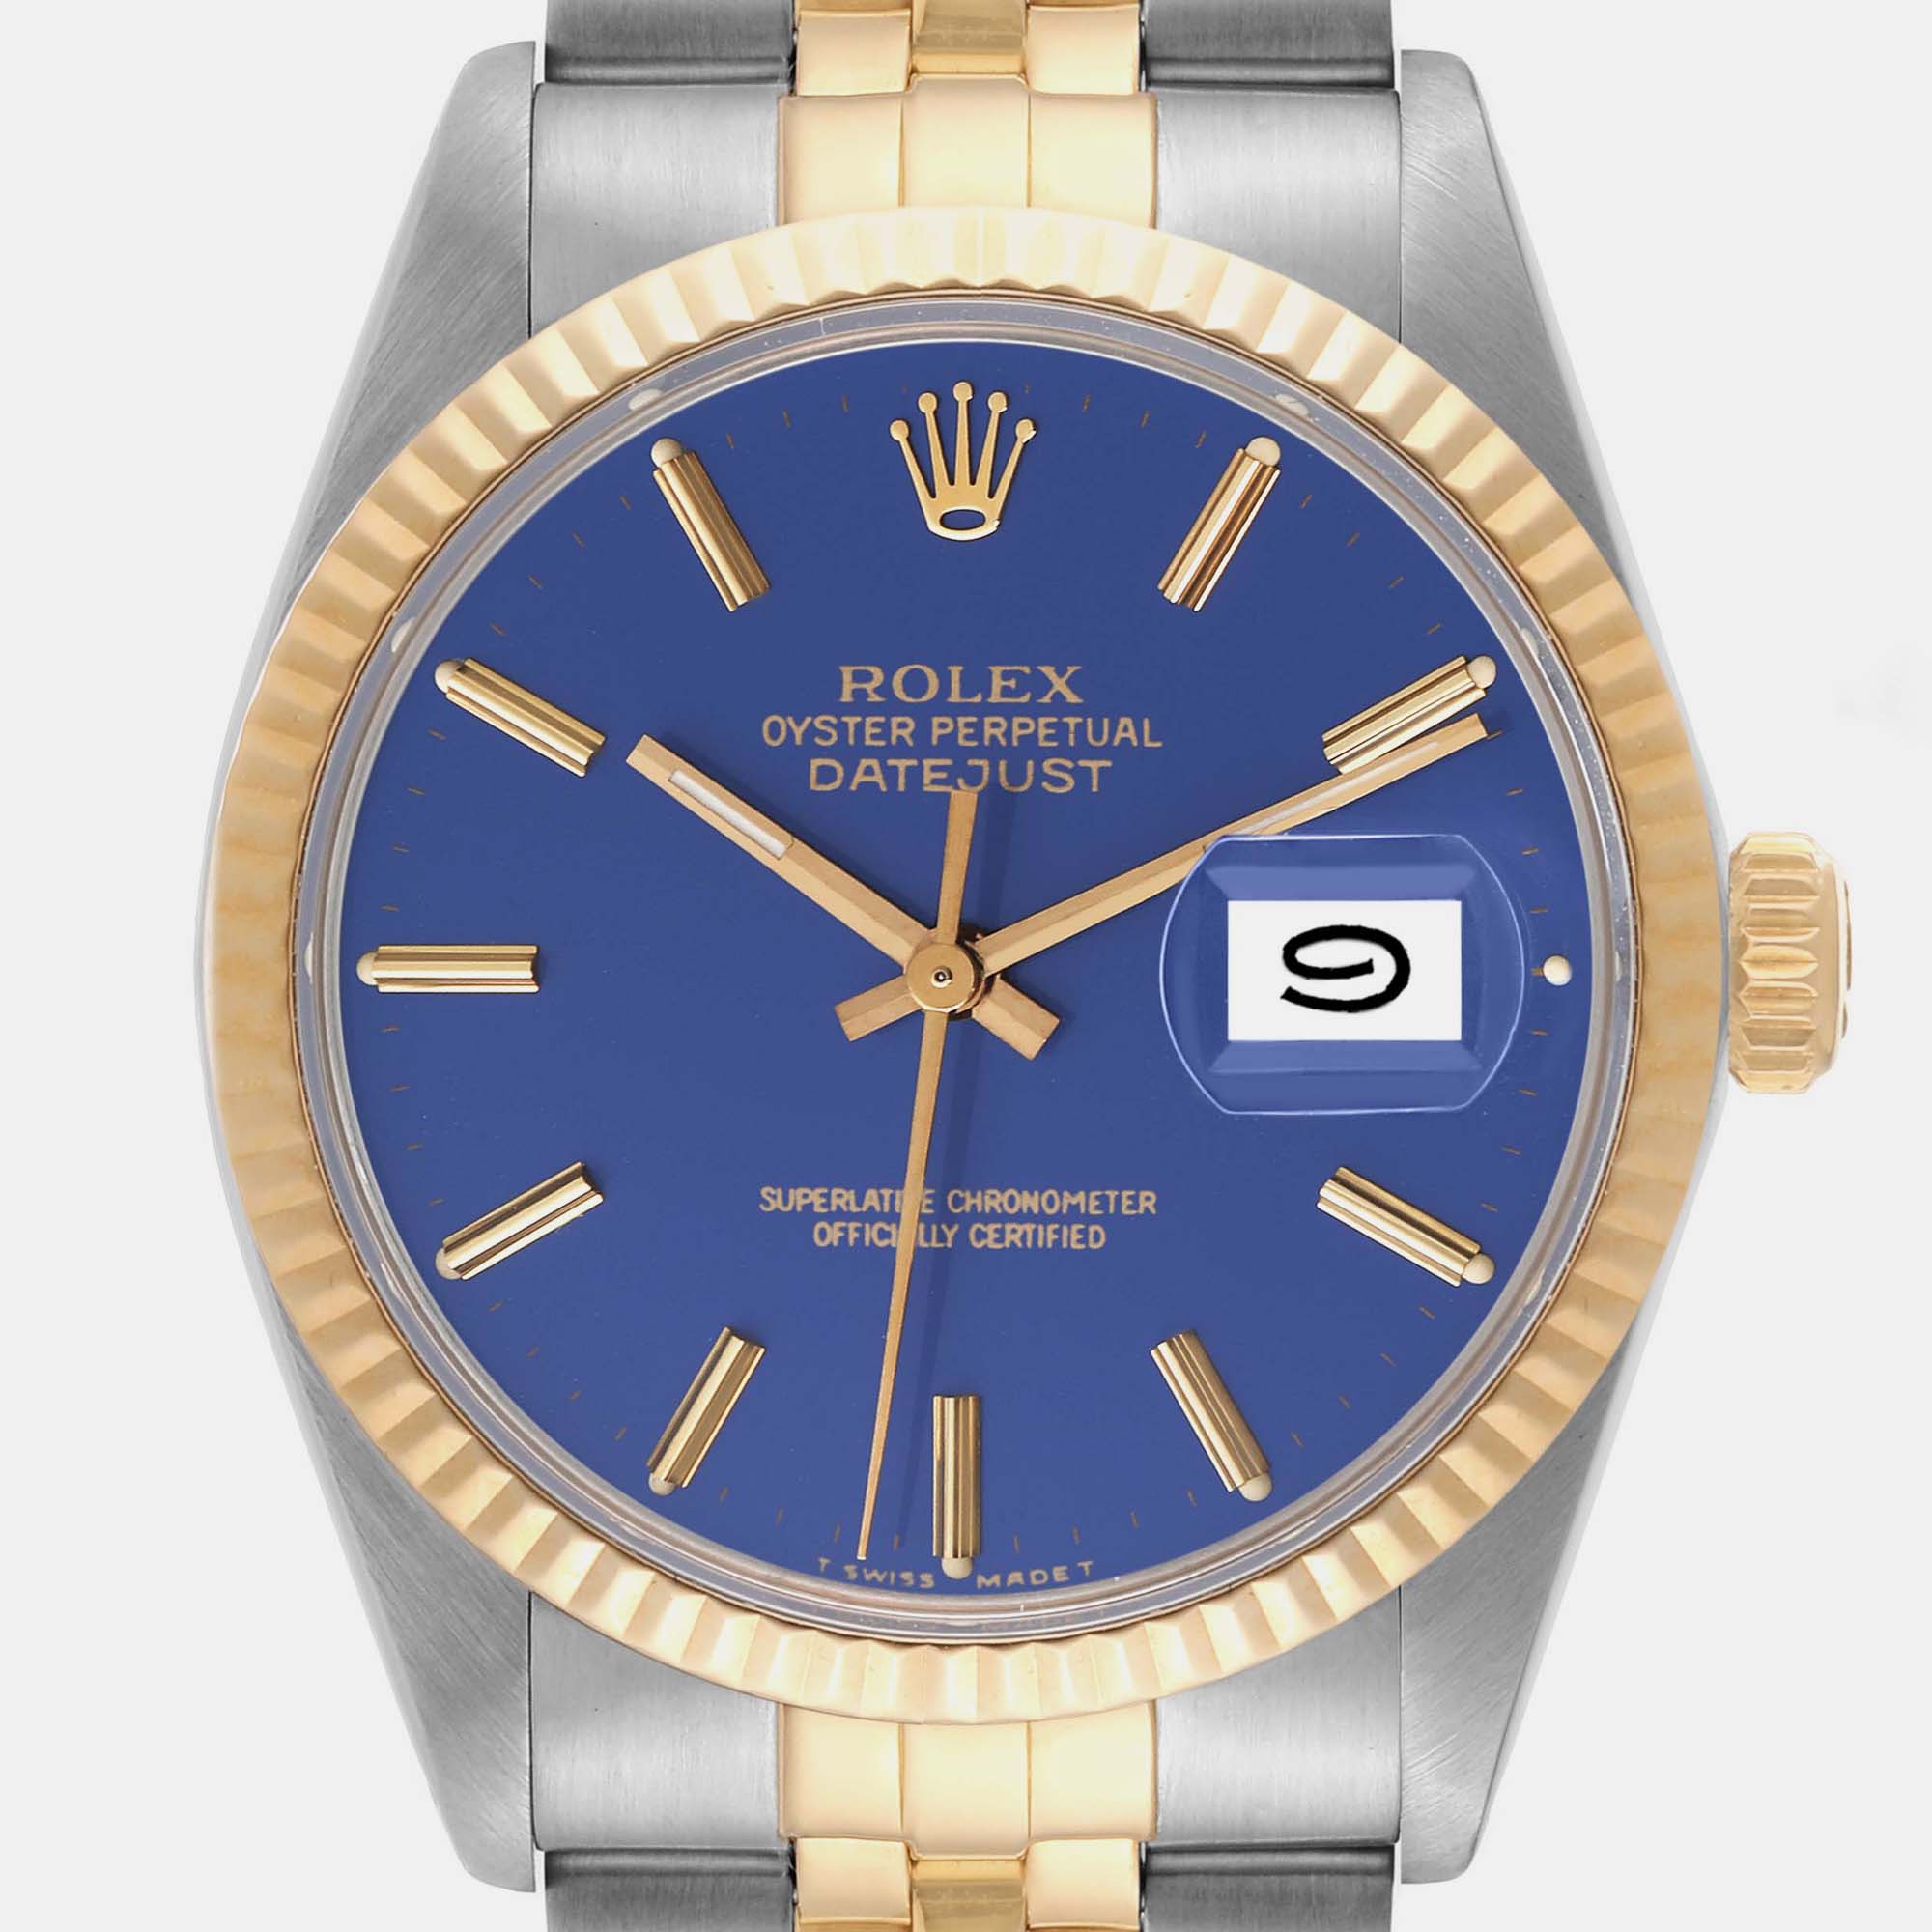 Rolex Datejust Steel Yellow Gold Blue Dial Vintage Mens Watch 16013 36 Mm